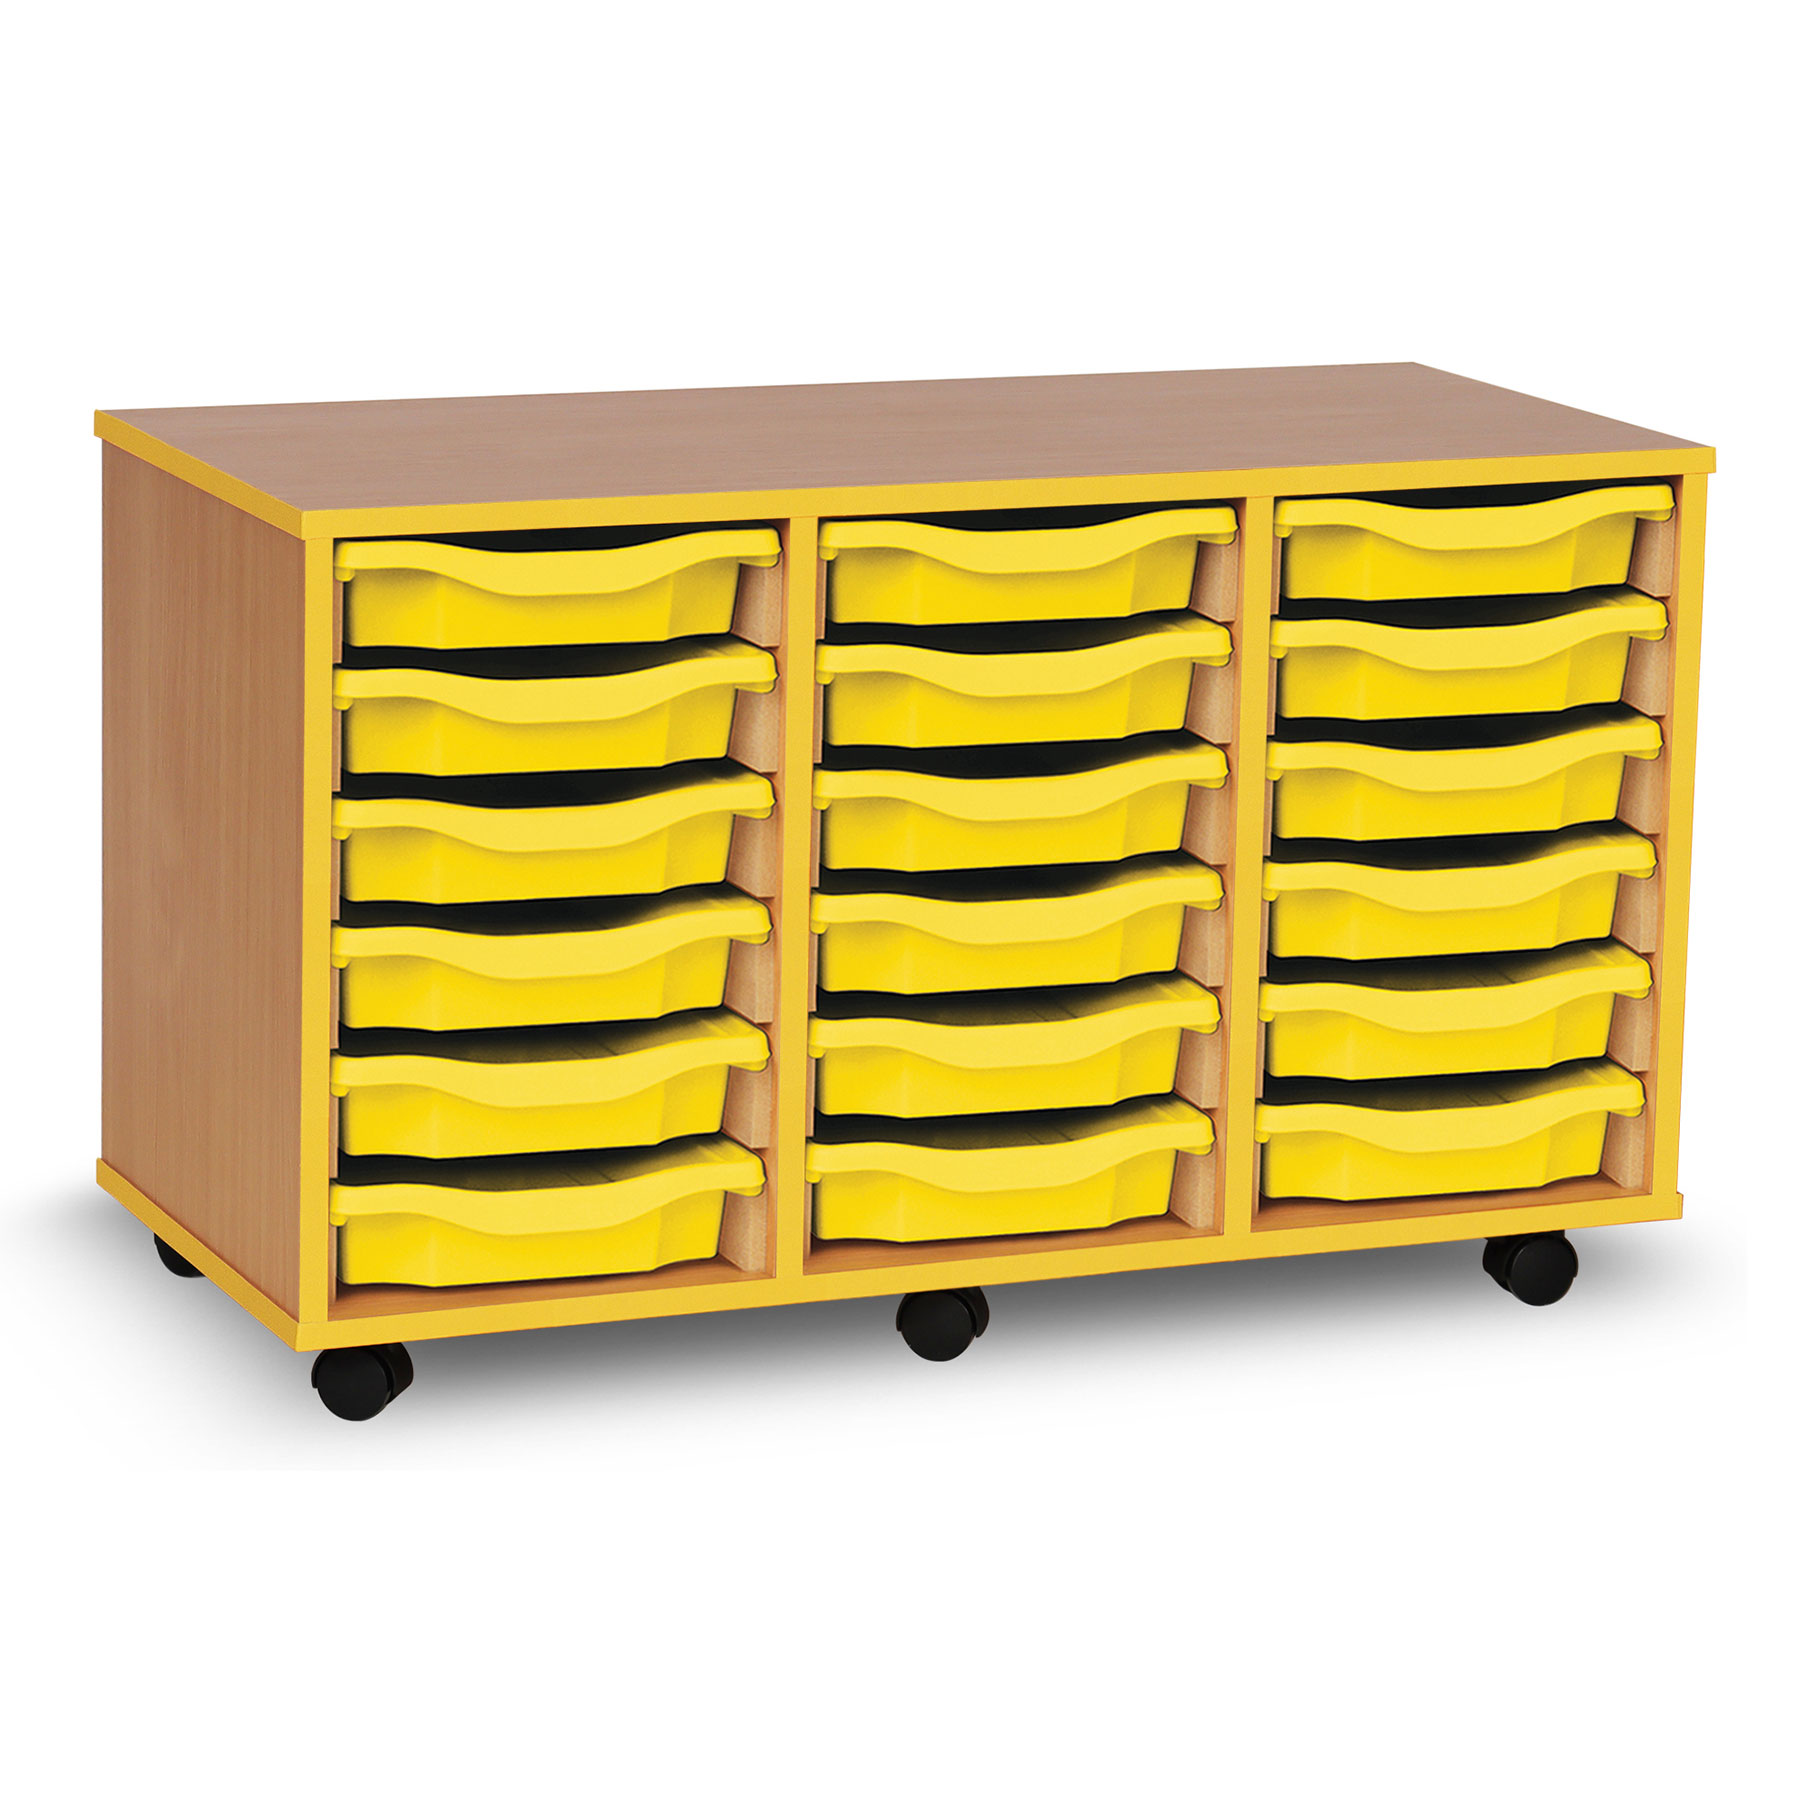 18 Single Tray Unit with Yellow Edging, Castors & Yellow Trays